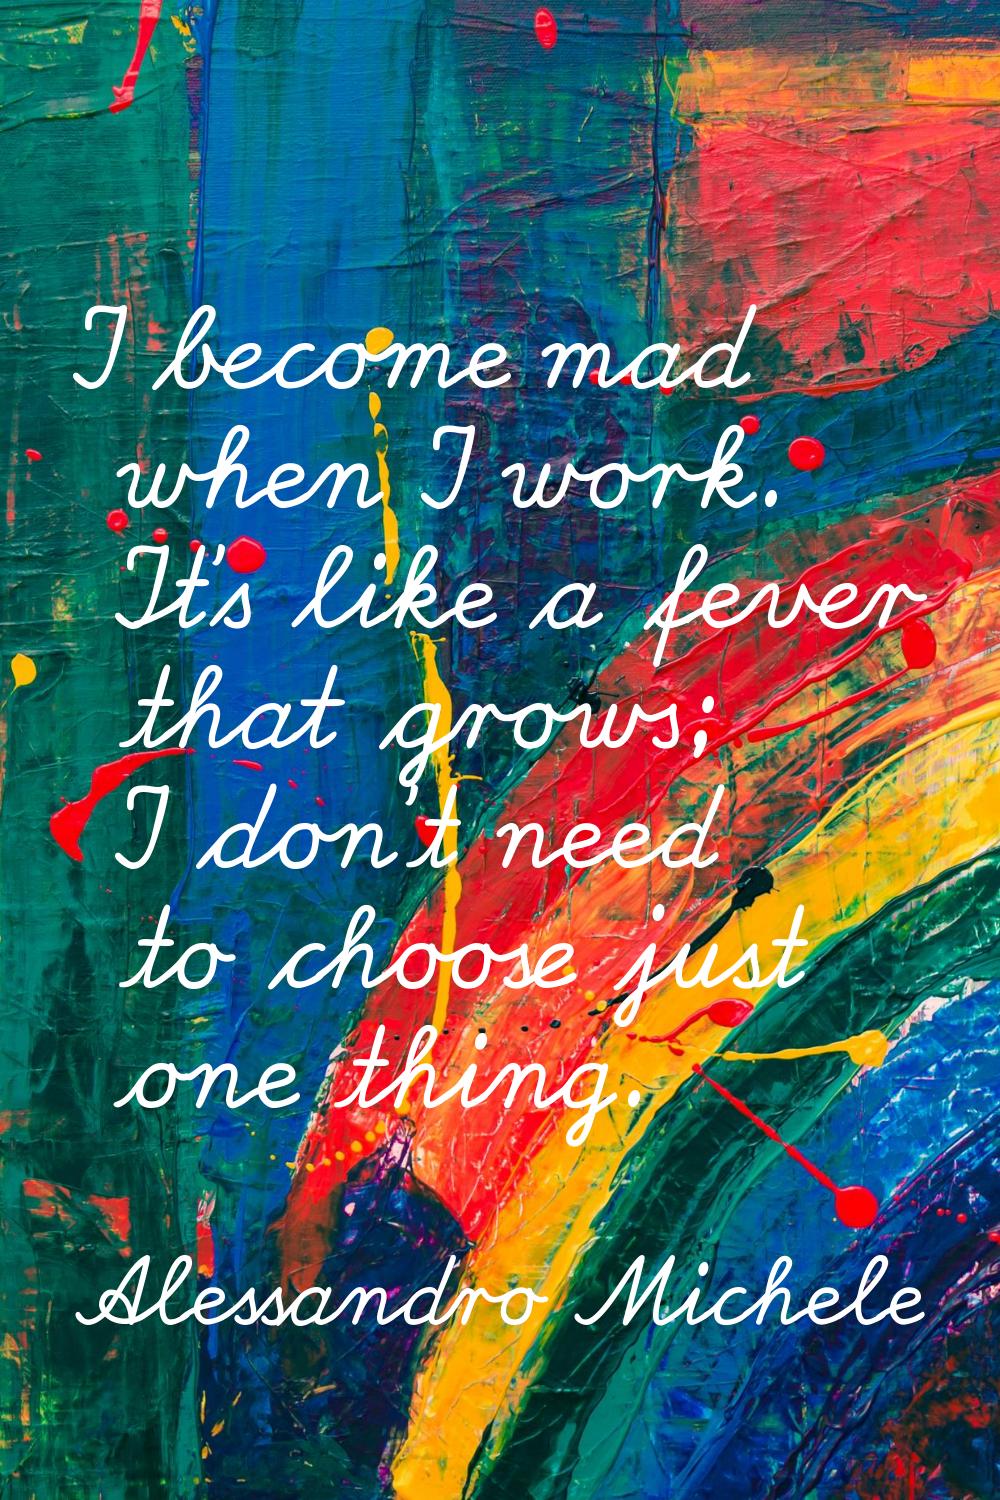 I become mad when I work. It's like a fever that grows; I don't need to choose just one thing.